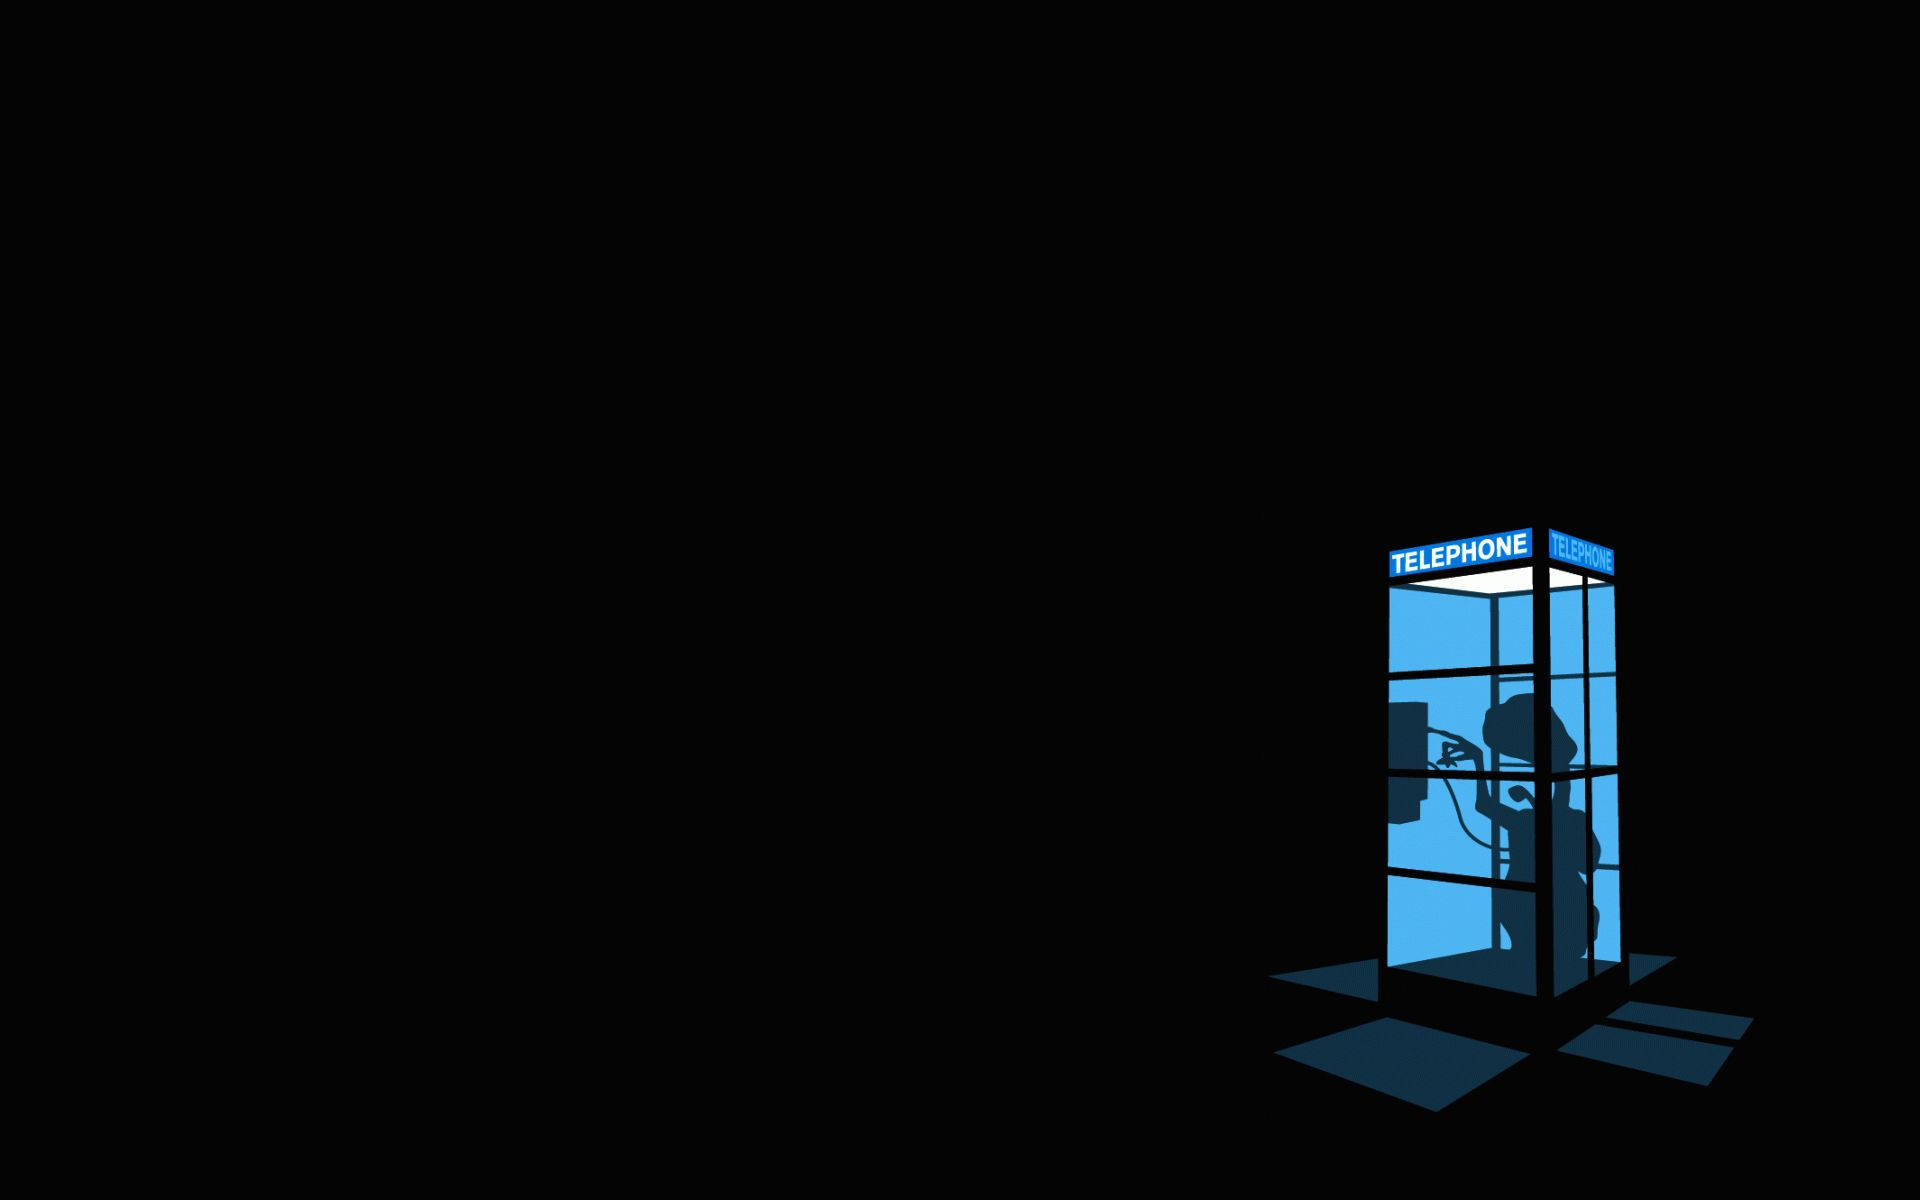 Simple Desktop Telephone Booth Background